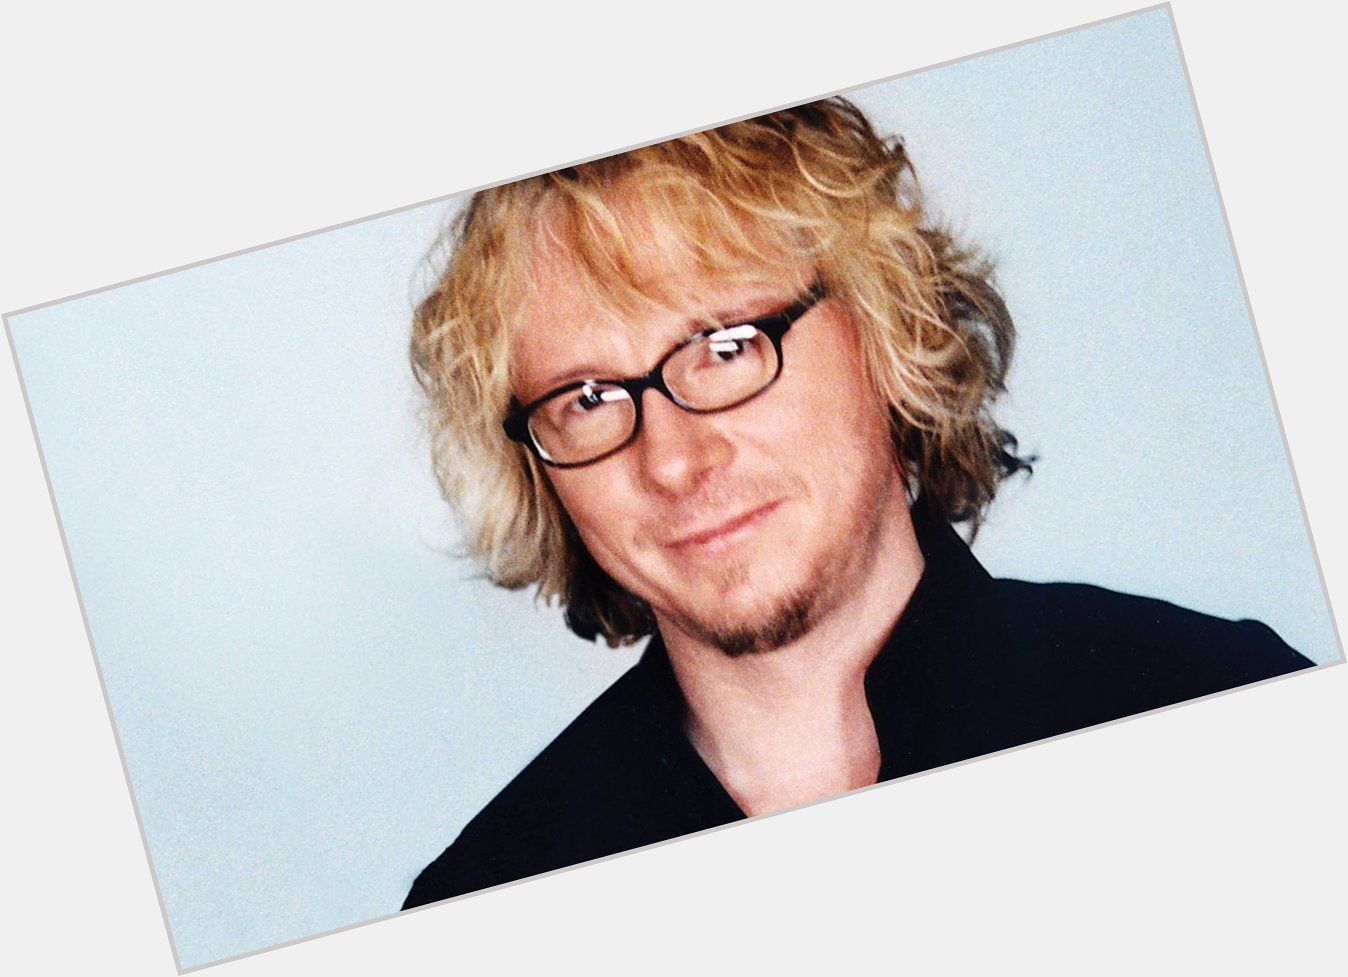 Happy Birthday to Mike Mills of R.E.M. - 